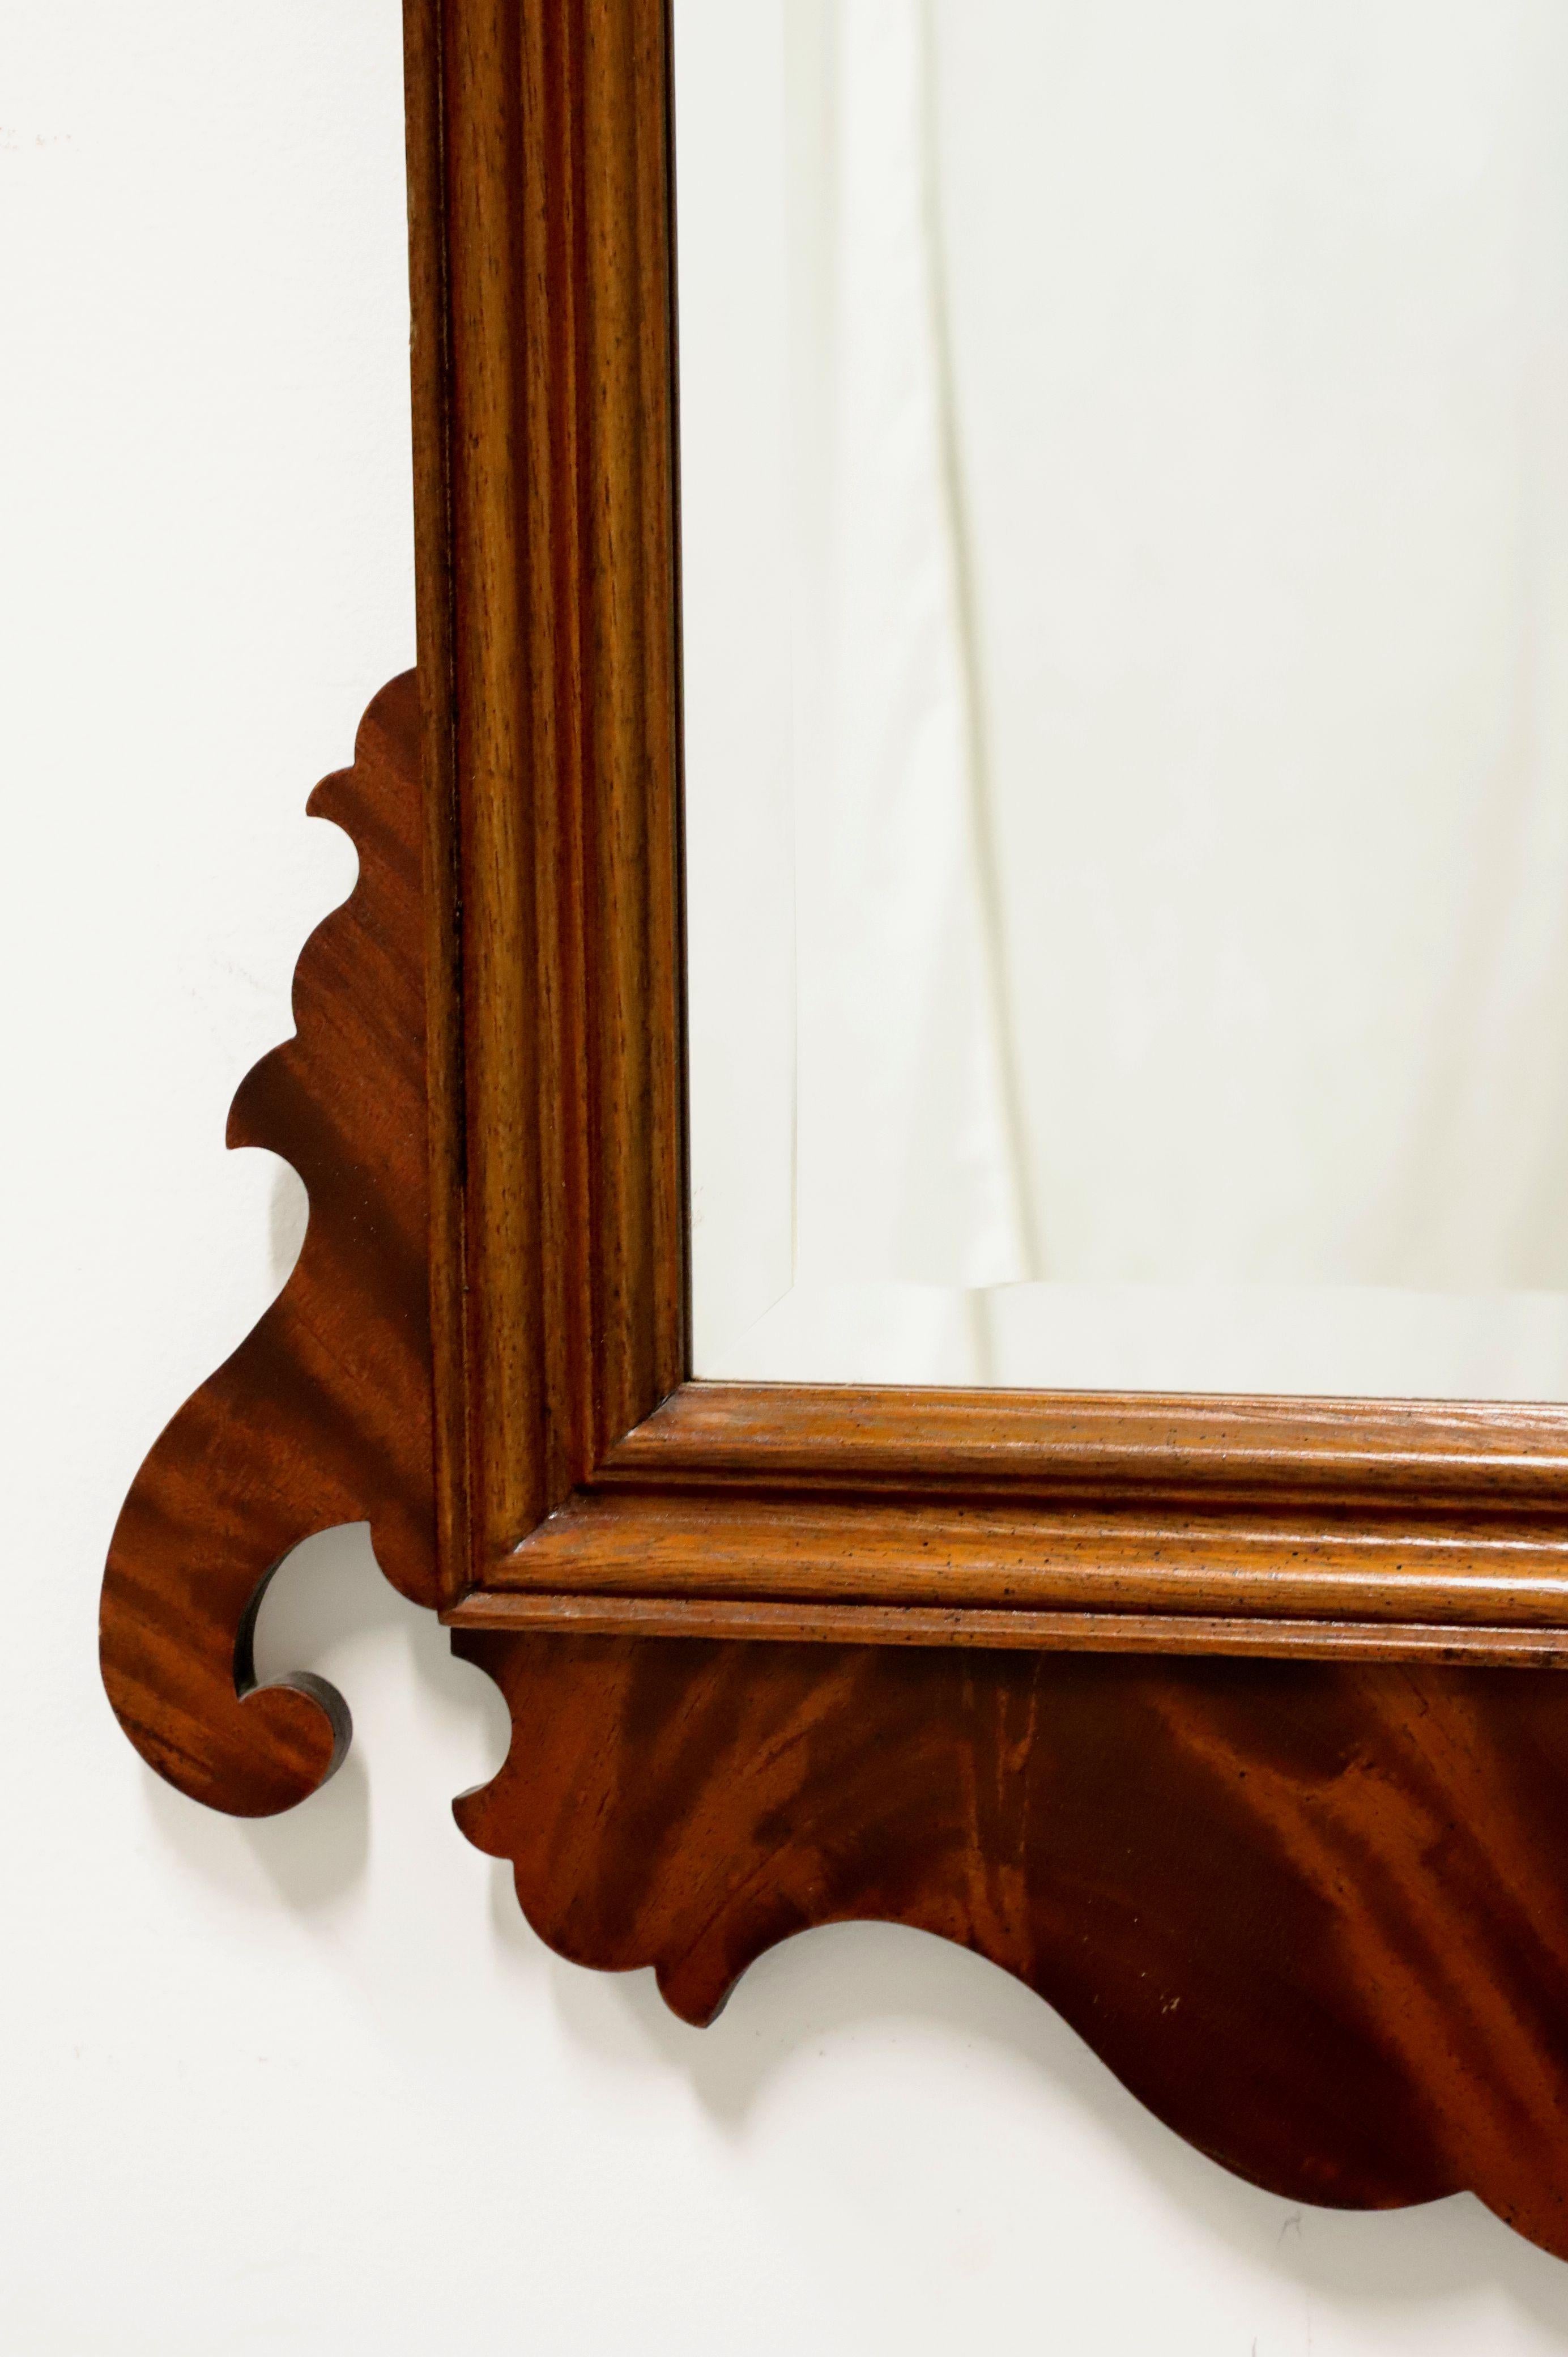 20th Century HEKMAN Crotch Mahogany Chippendale Beveled Wall Mirror For Sale